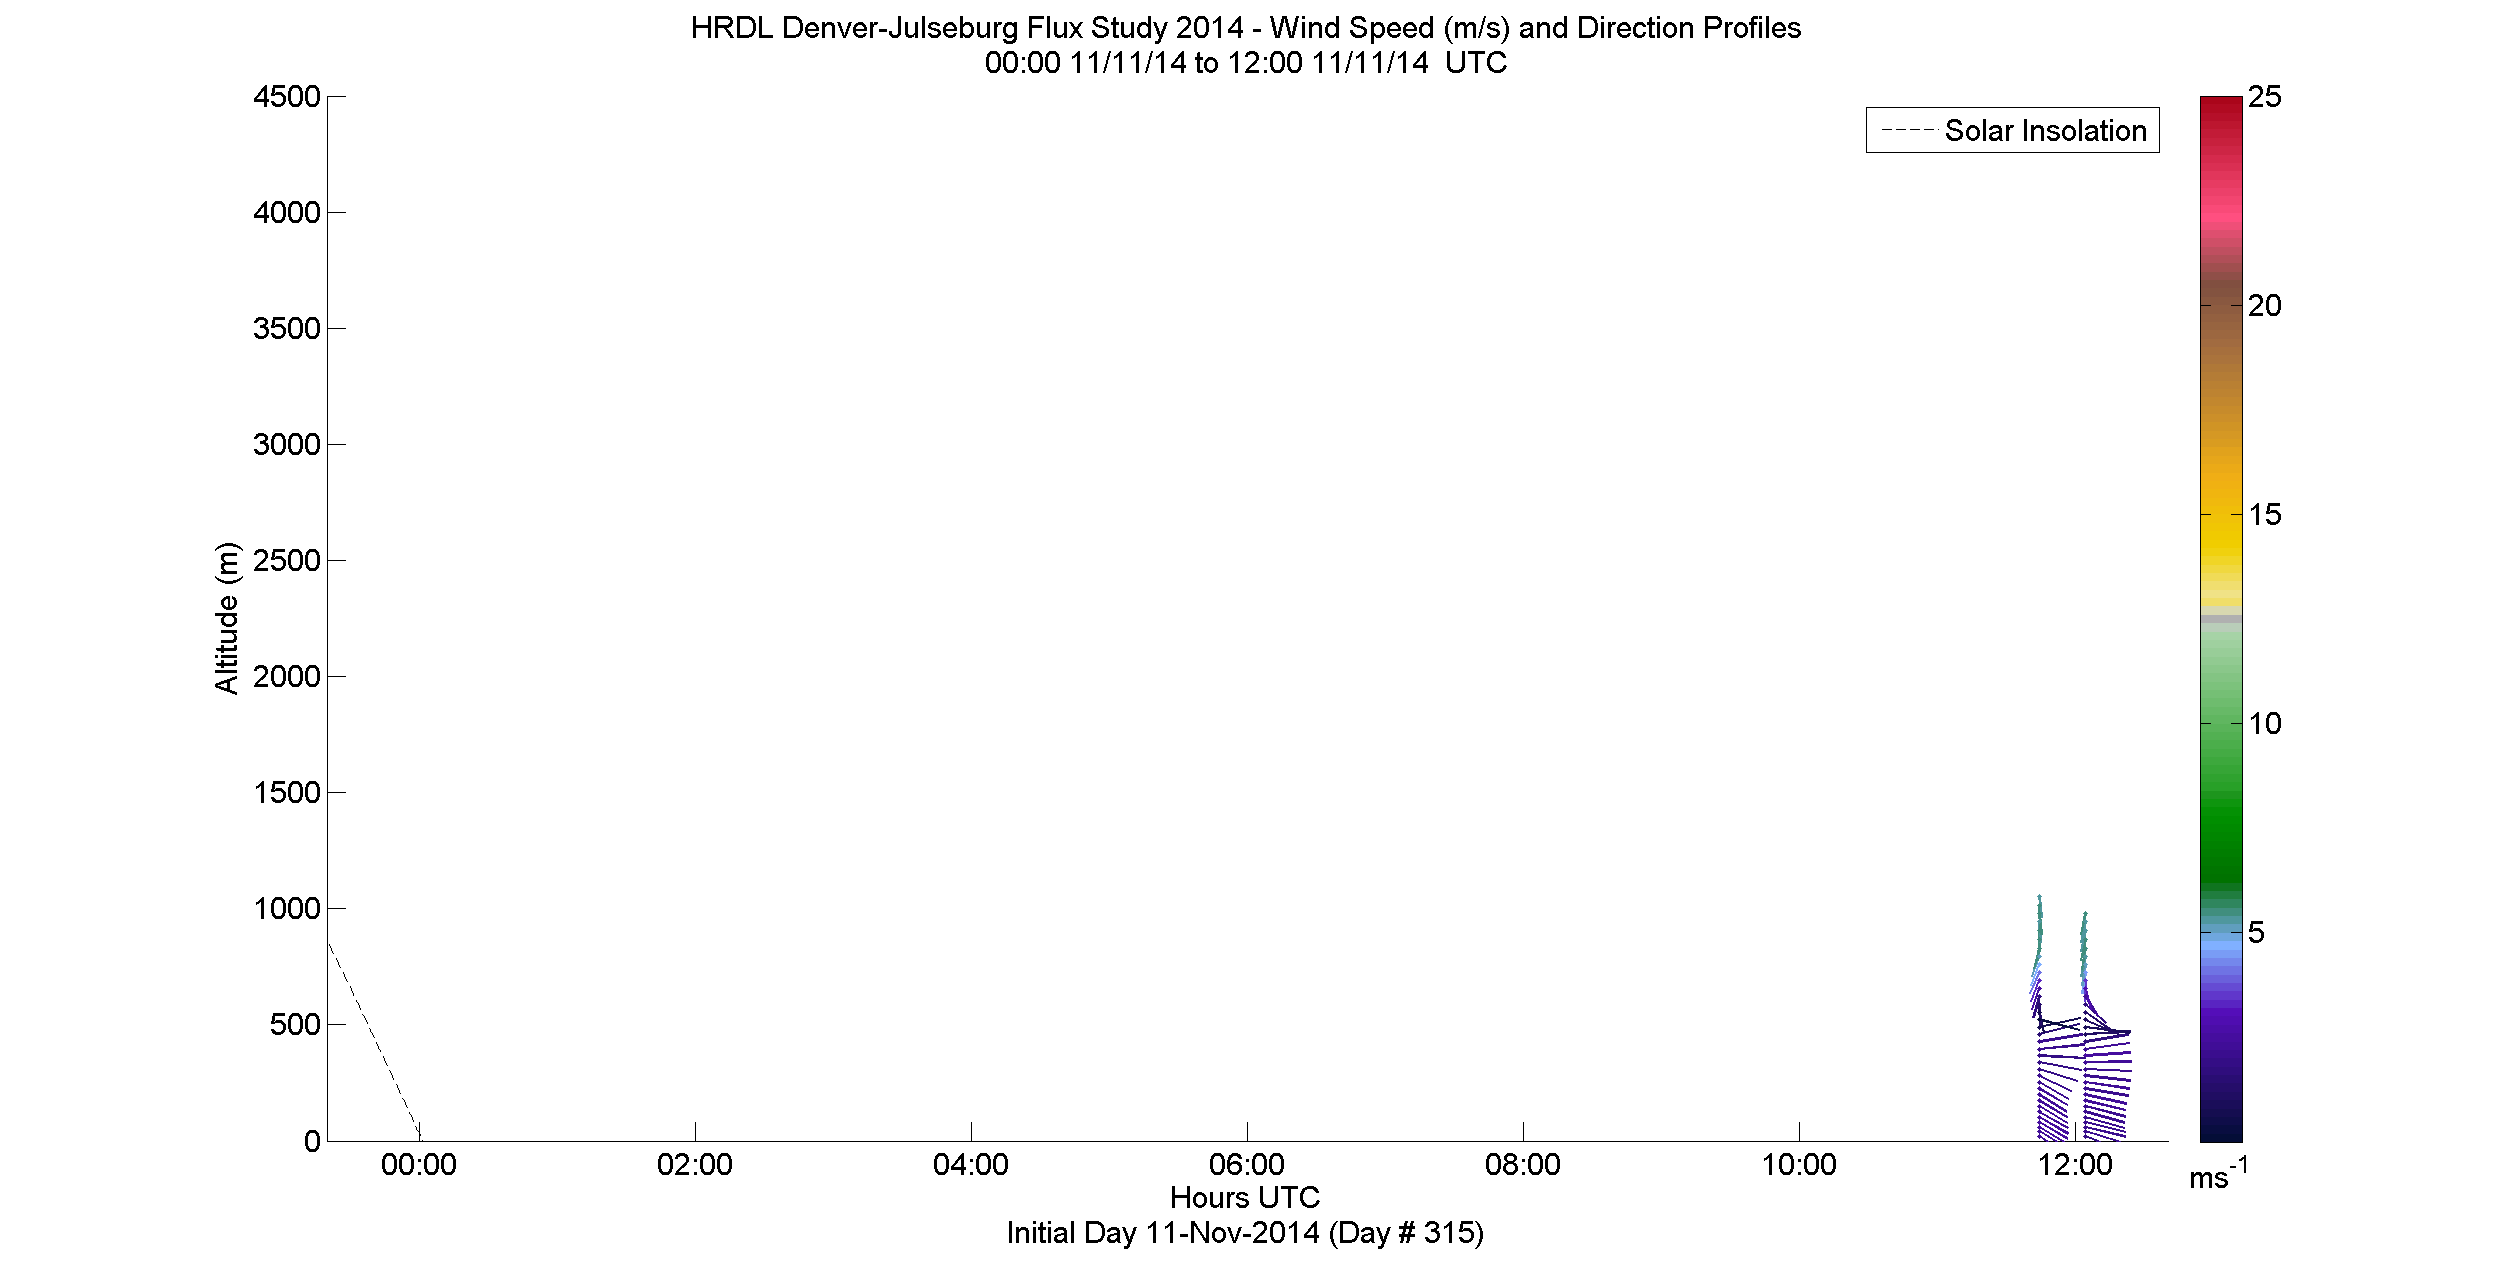 HRDL speed and direction profile - November 11 am